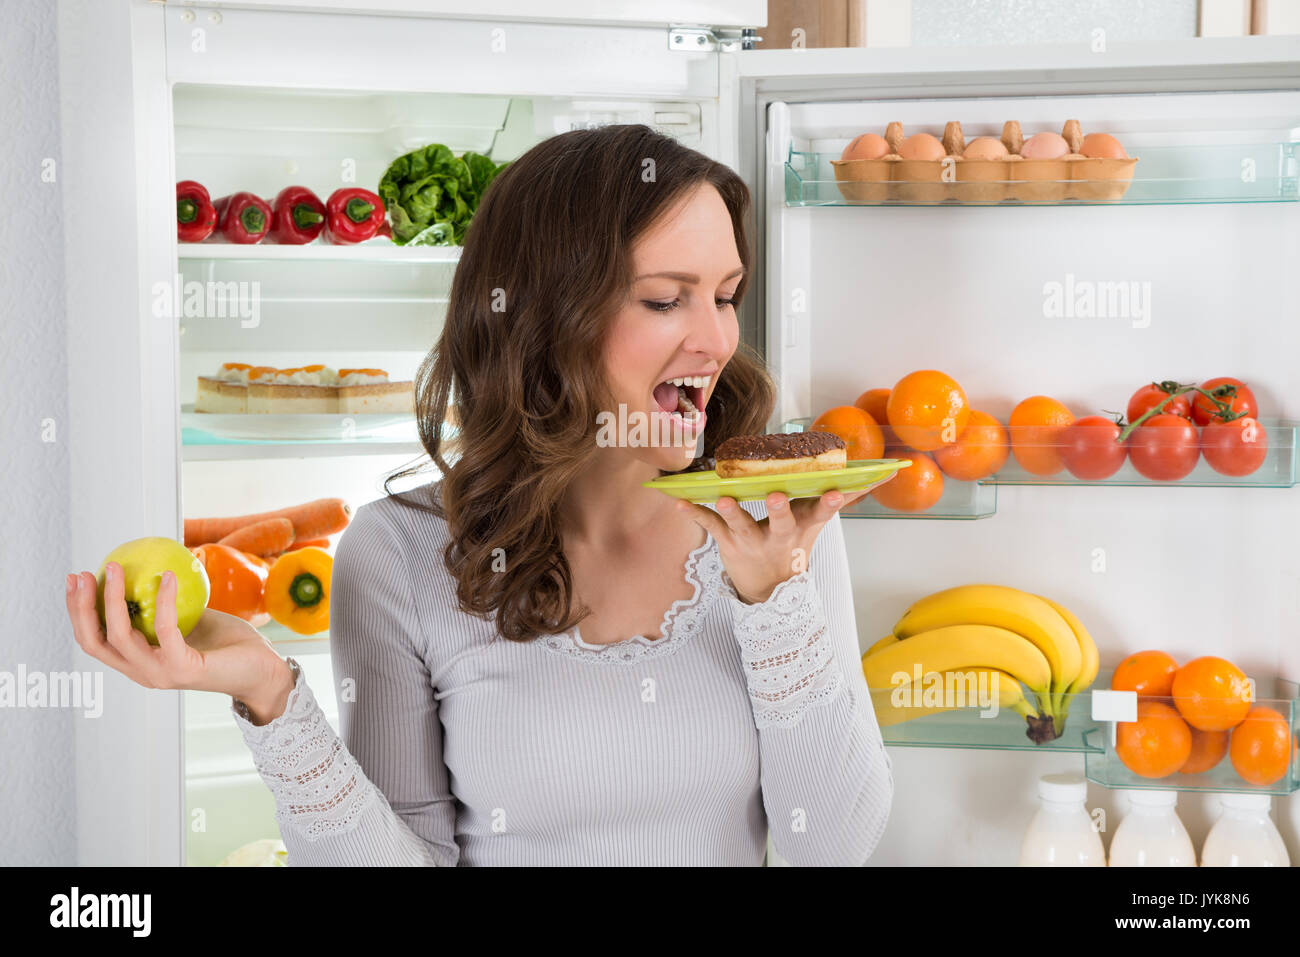 Young Woman With Green Apple Eating Donut In Front Of Fridge Stock Photo